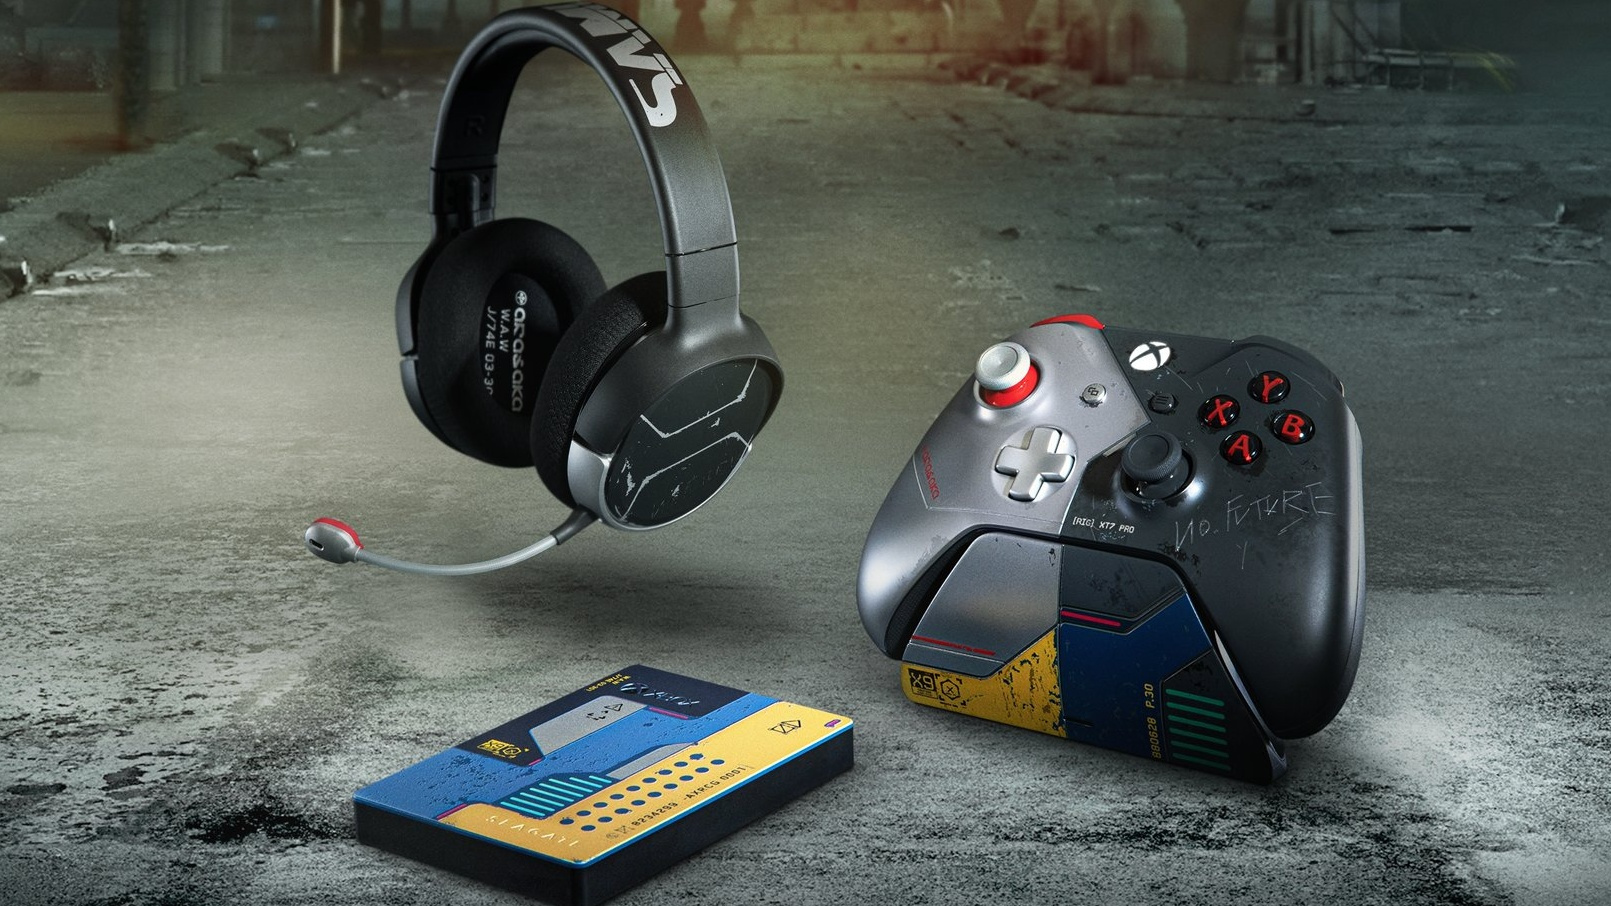 Enhance Your Cyberpunk 2077 Experience With This Matching Headset